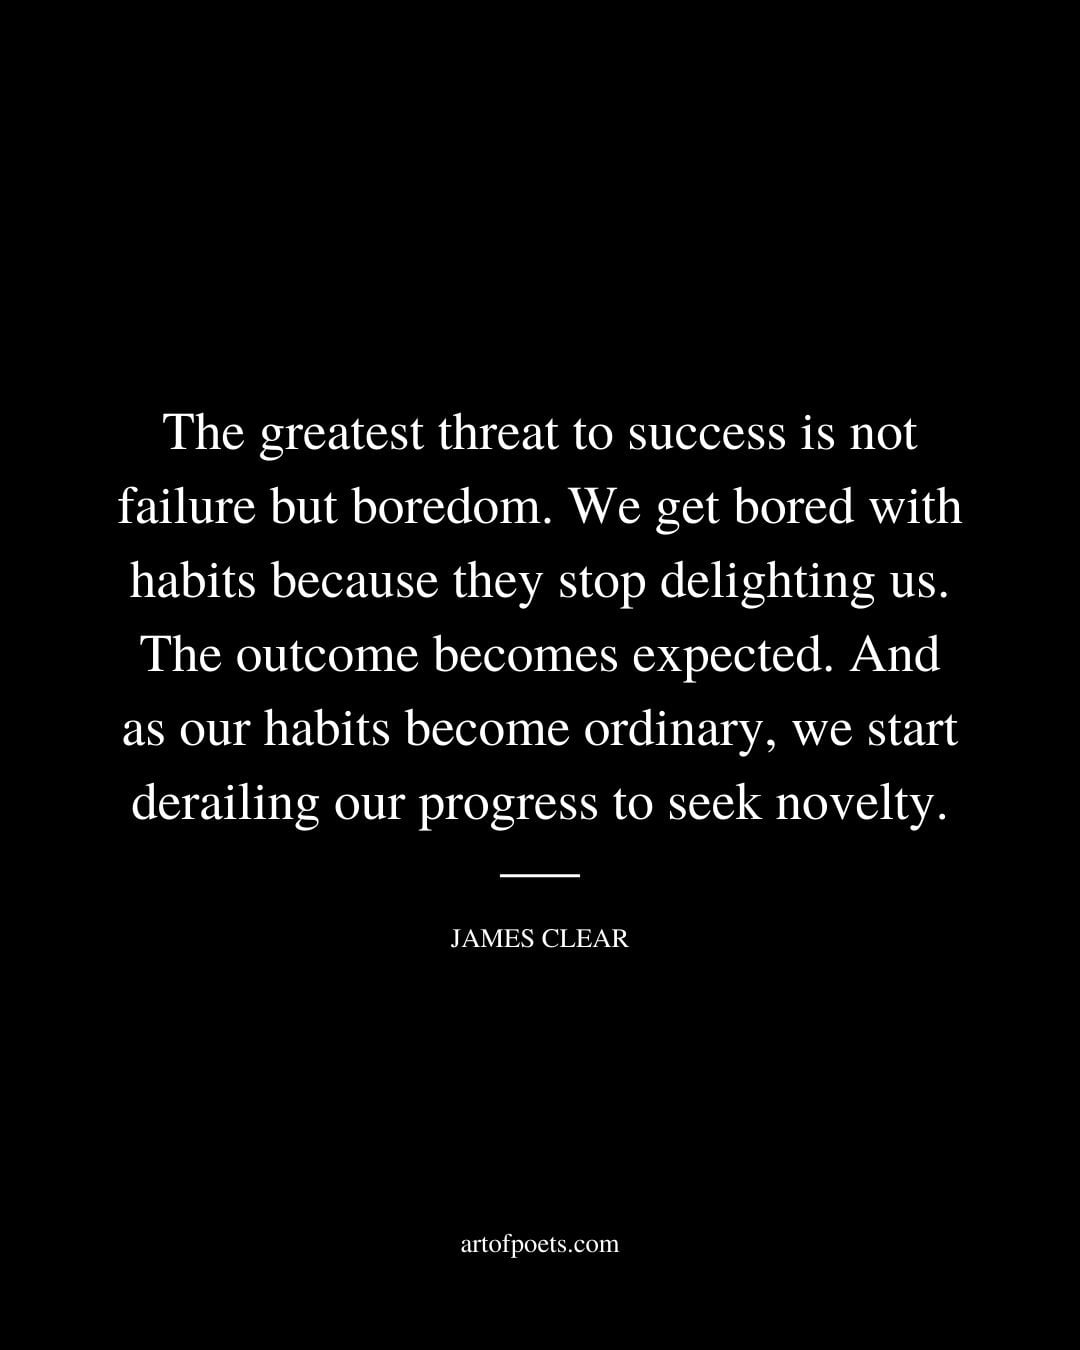 The greatest threat to success is not failure but boredom. We get bored with habits because they stop delighting us. The outcome becomes